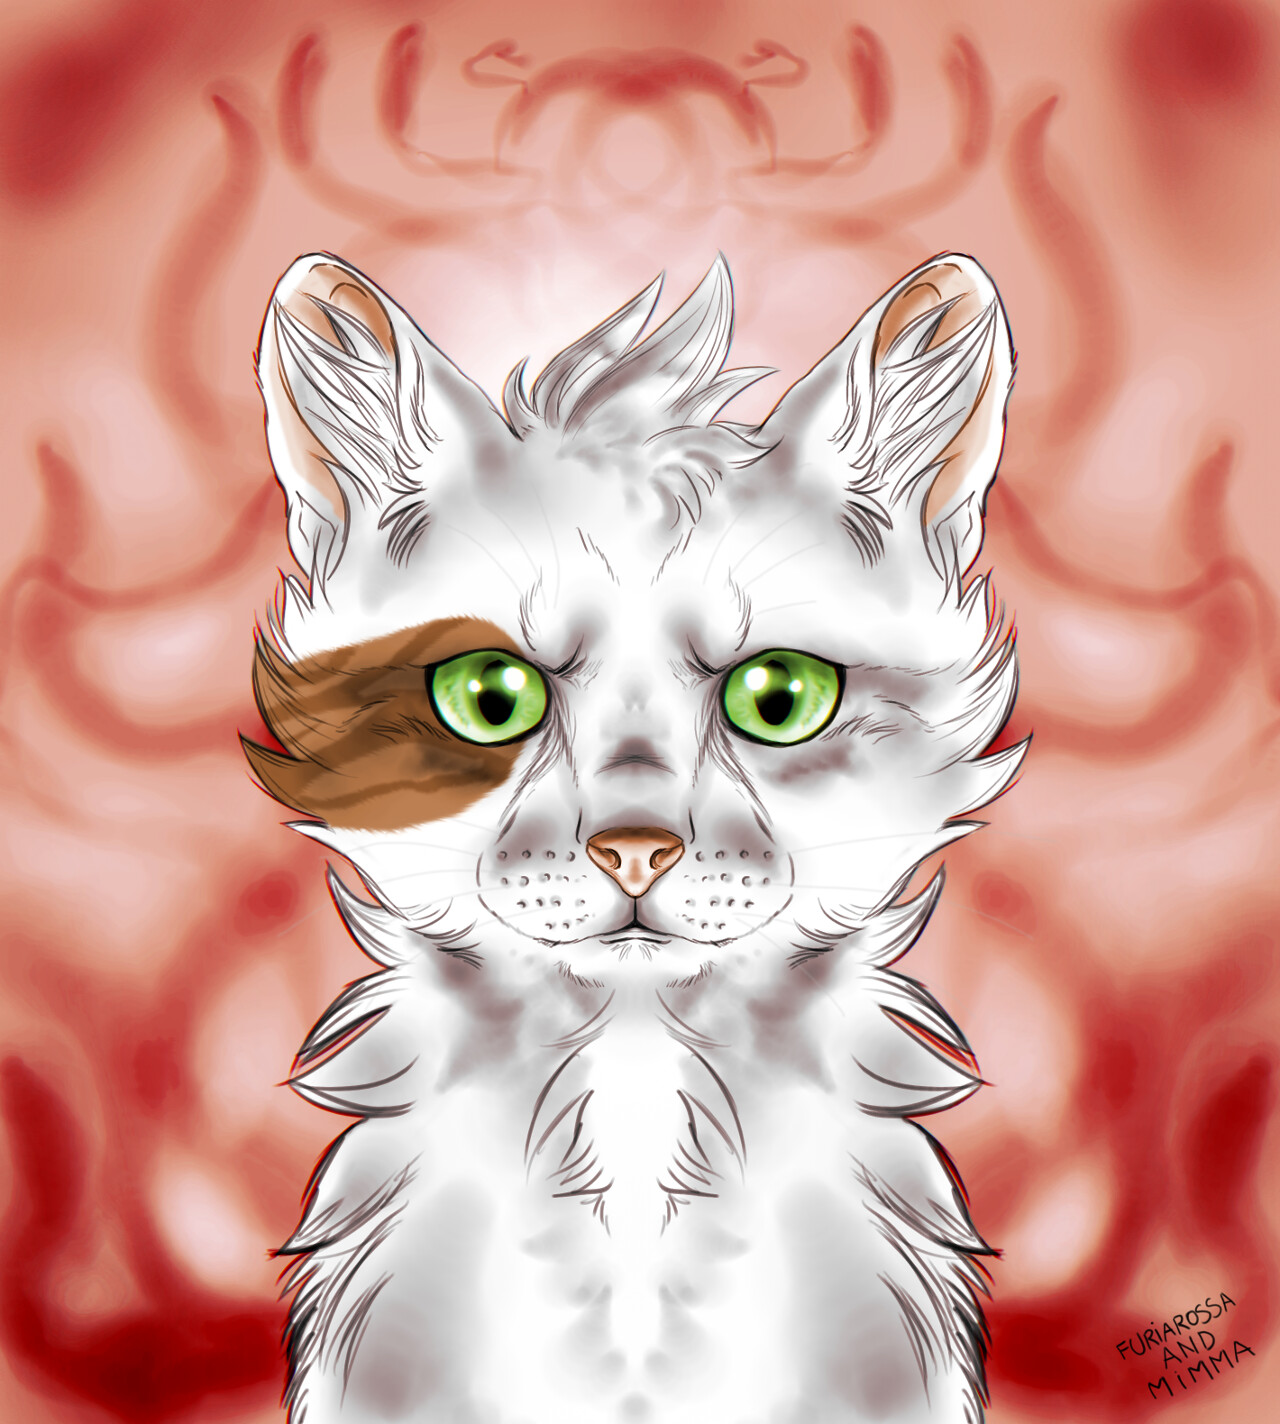 Another ArtFight attack! All we know about muddpaws's Cloudstripe is that he's short and angry, so... of course, here's a small but furious kitty portrait in digital art!
